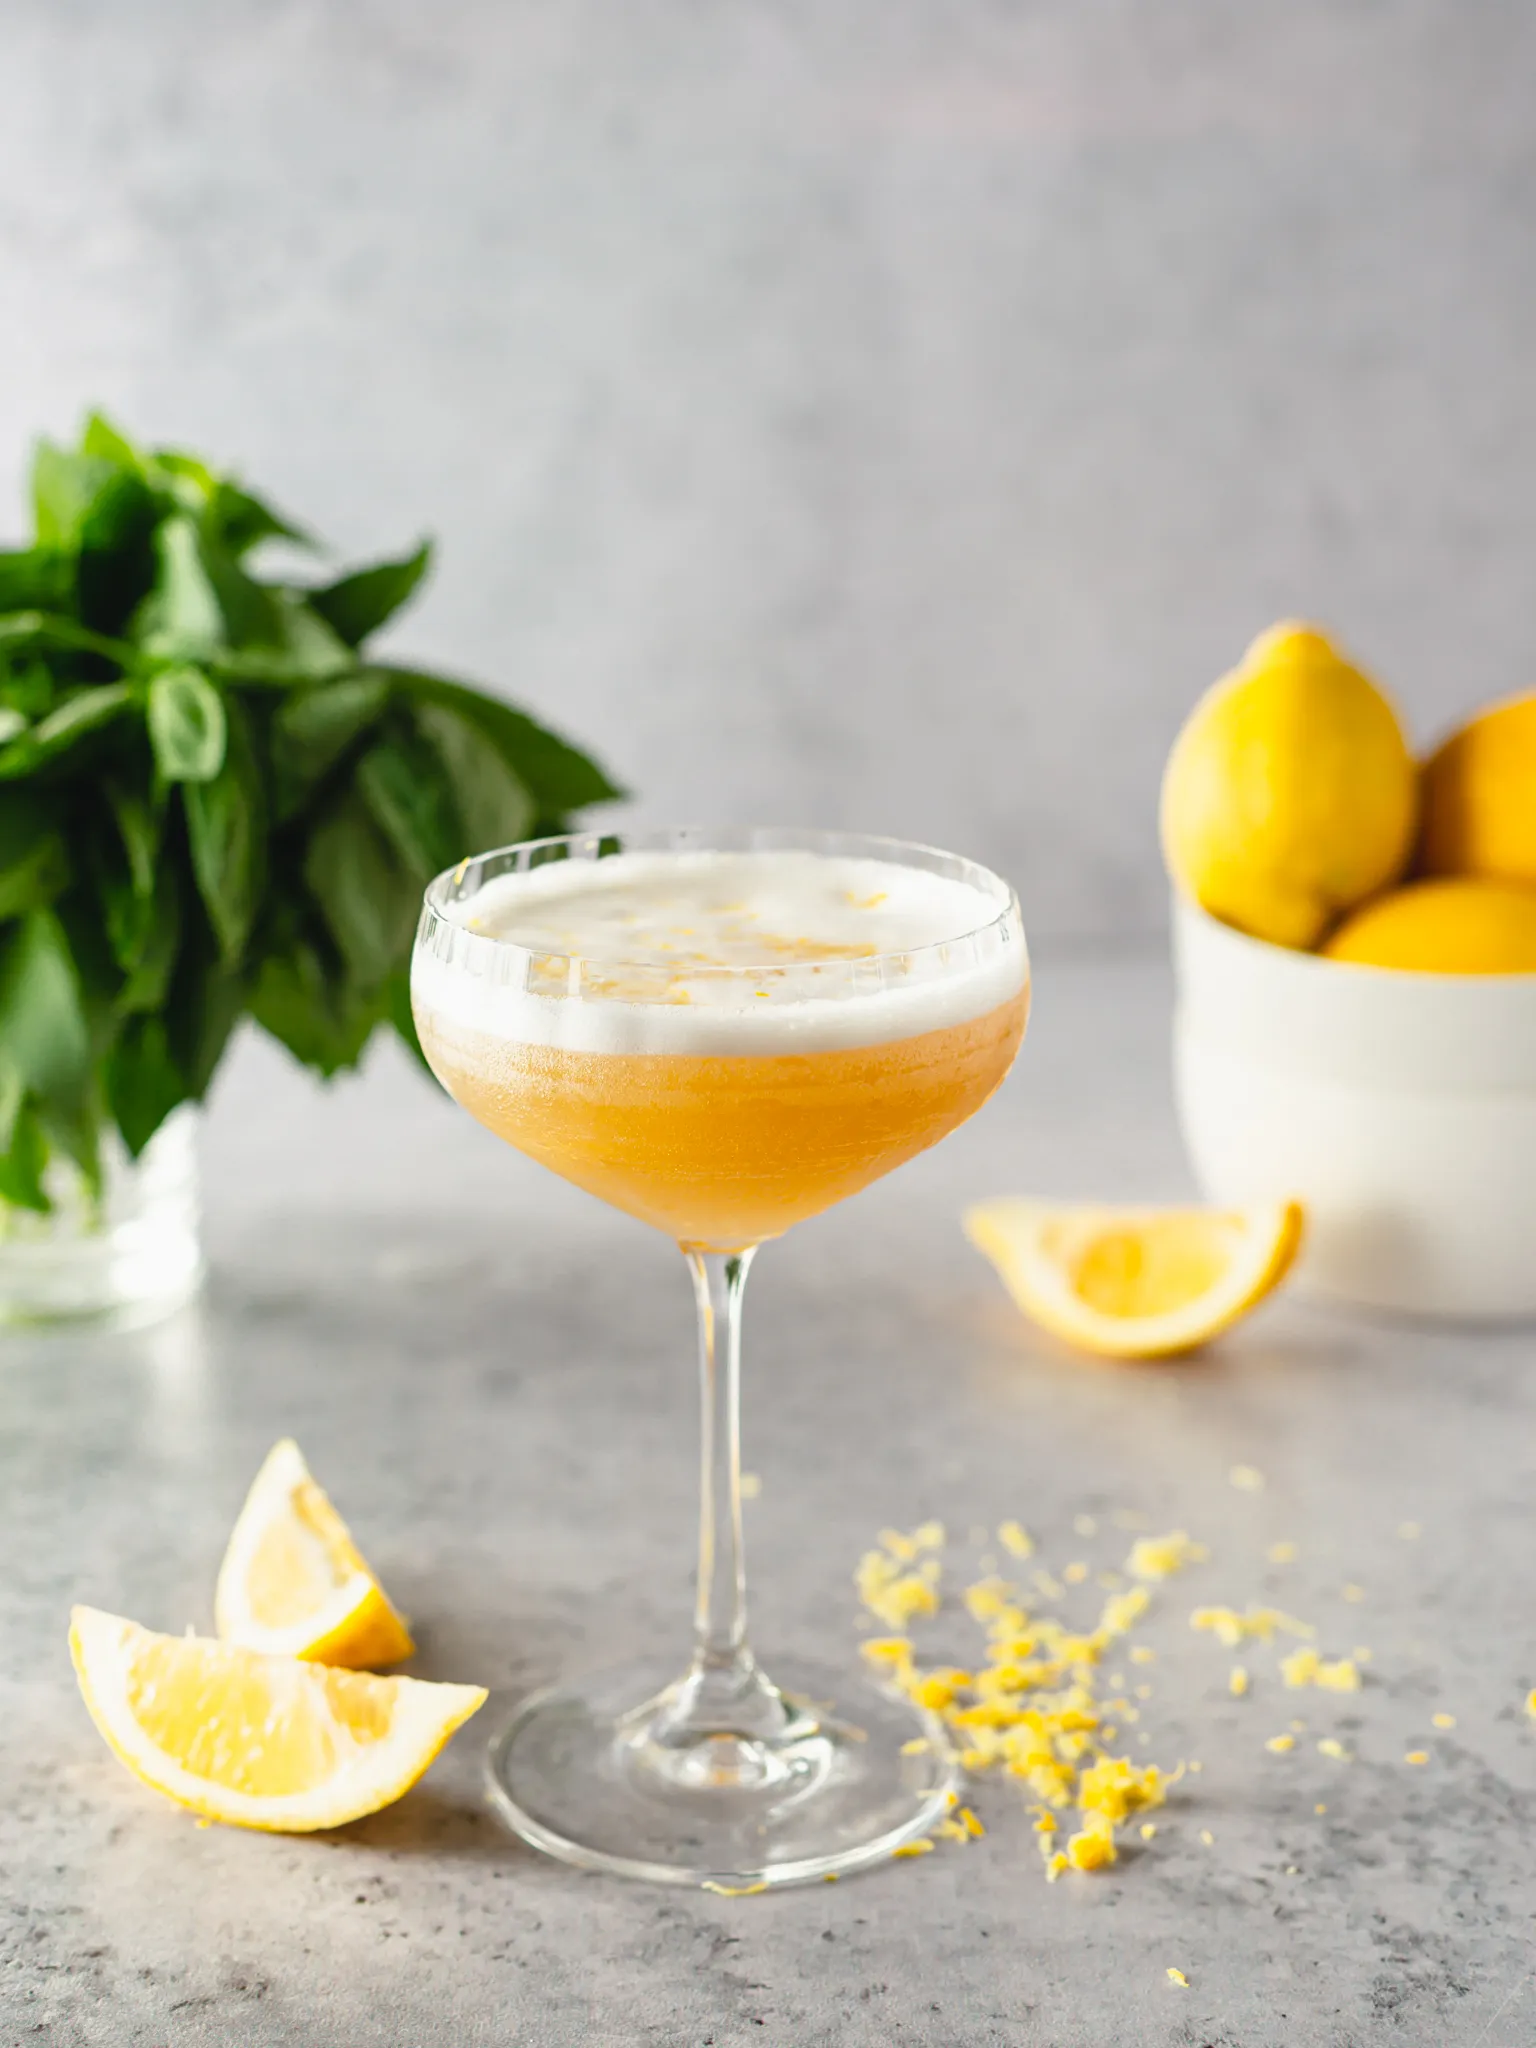 Lemon fruit cocktail on a table. Garnished with lime.